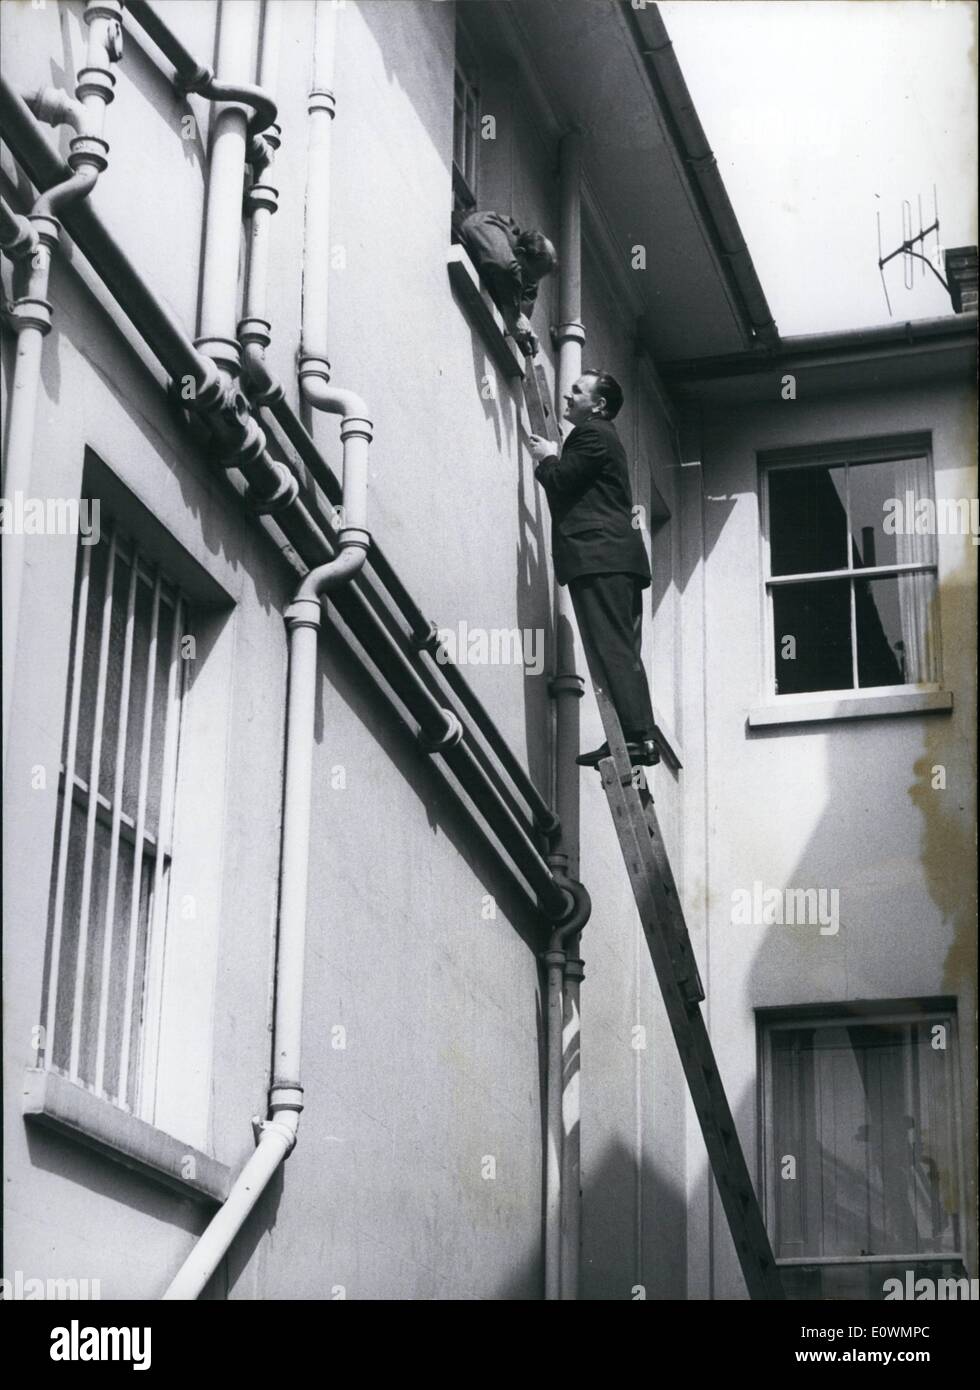 Aug. 08, 1963 - 0,000 Raid In Kensington: While the owners, Mr. and Mrs. Michael Sieff were away for the Bank holiday weekend, thieves ransacked their Kensignston home and furs and paintings worth 0,000. Mr. Sieff is a director of Marks and Spencer. Photo Shows Detectives investigating a side window this morning. Stock Photo